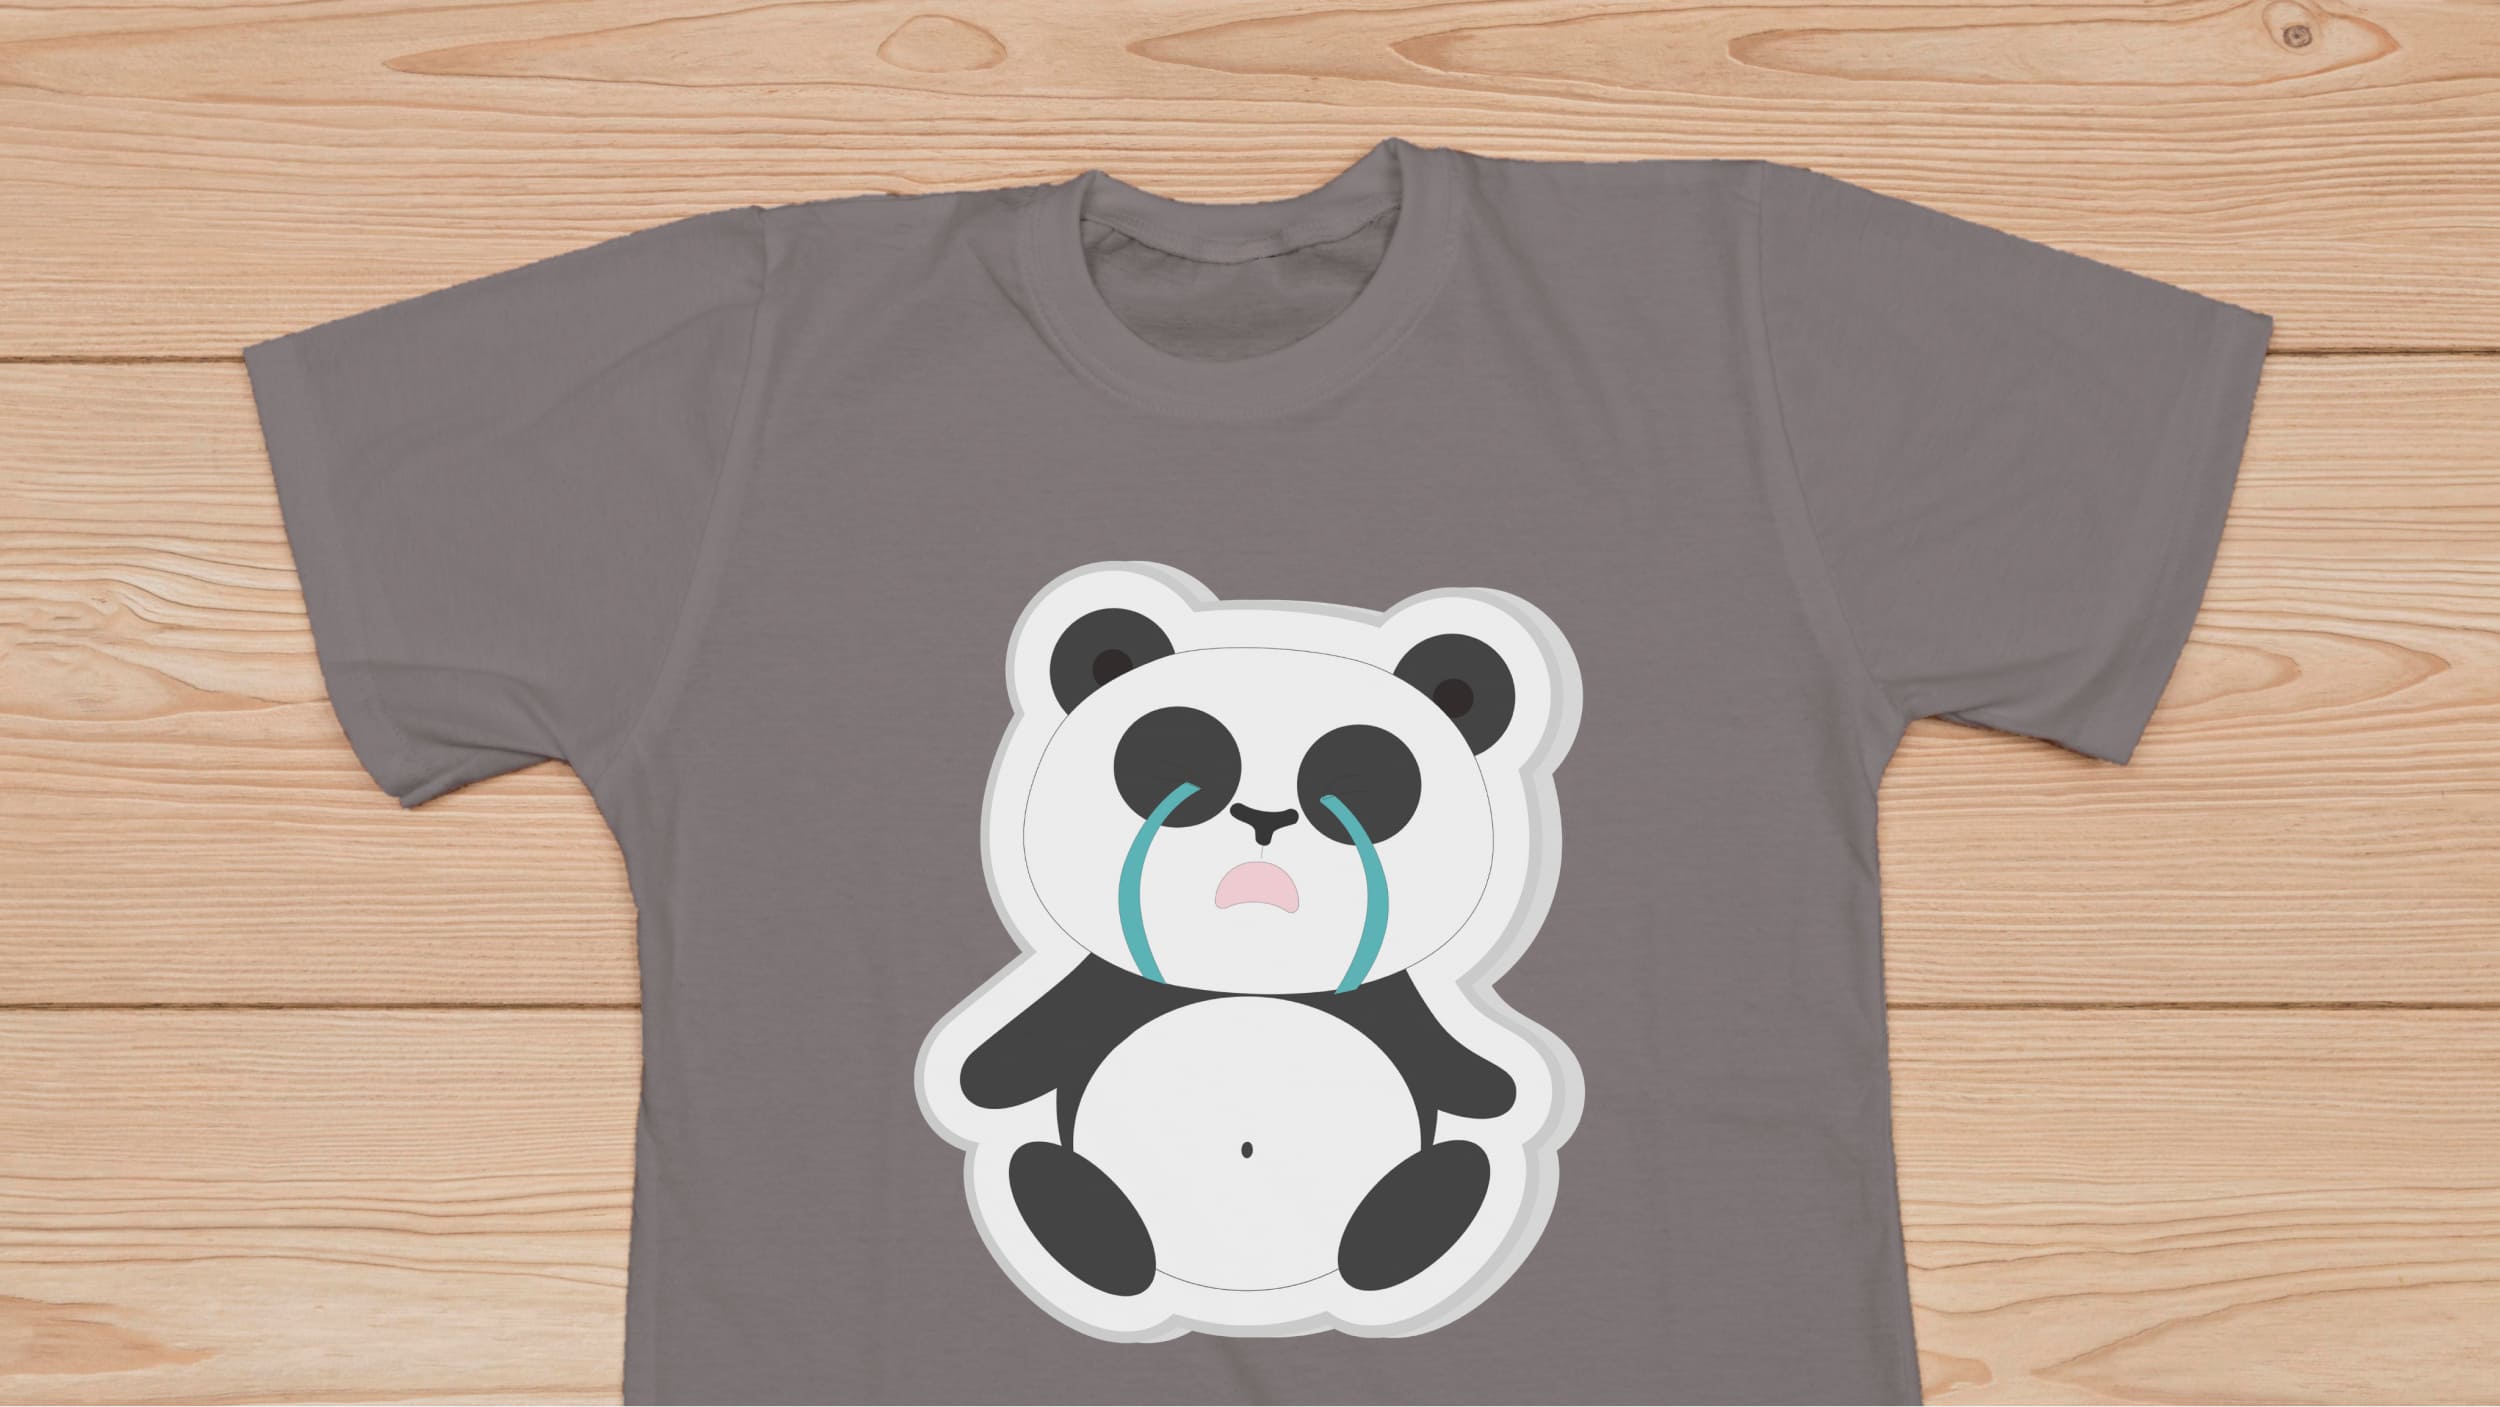 Gray t-shirt with a tearful panda bear on a wooden background.